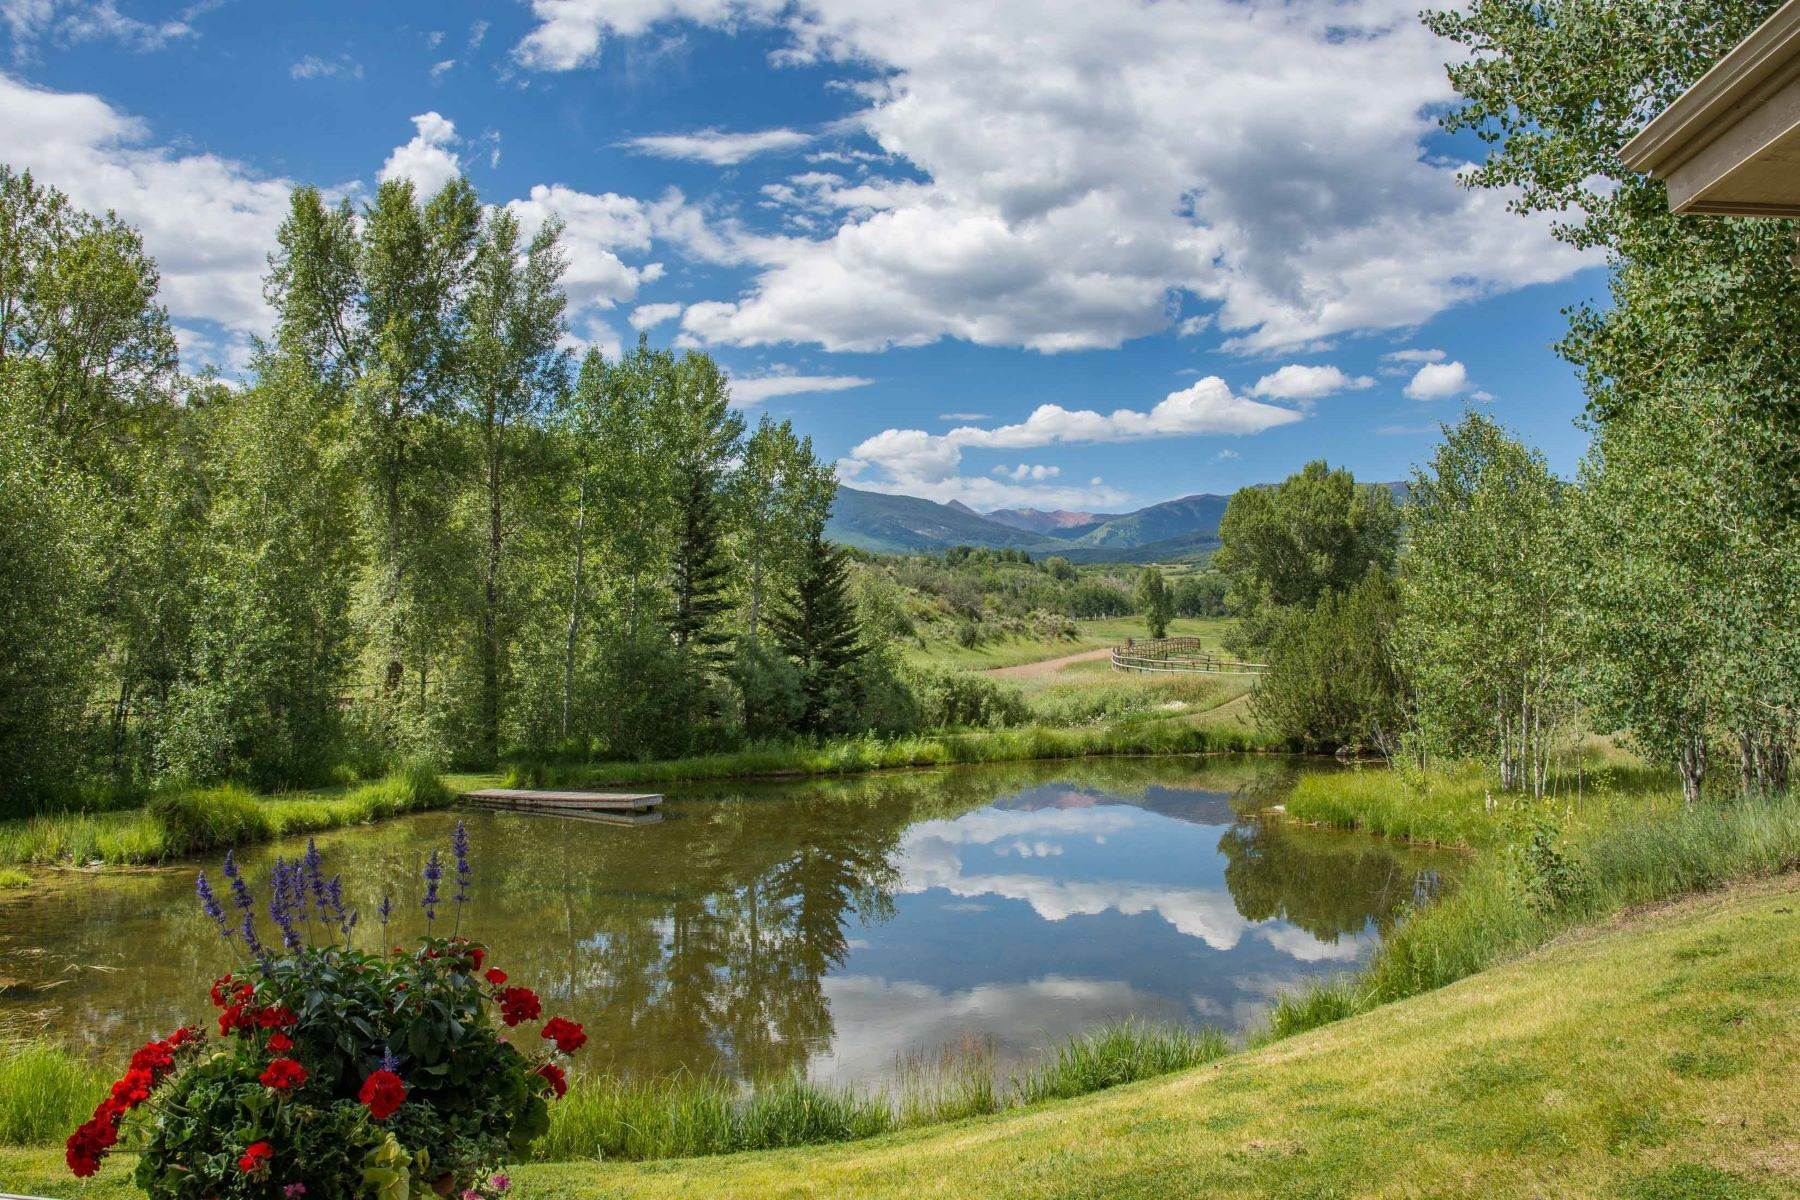 Farm and Ranch Properties para Venda às RARE and UNIQUE opportunity to own the heart of the renowned McCabe Ranch! 1321 Elk Creek & TBD McCabe Ranch Road Old Snowmass, Colorado 81654 Estados Unidos